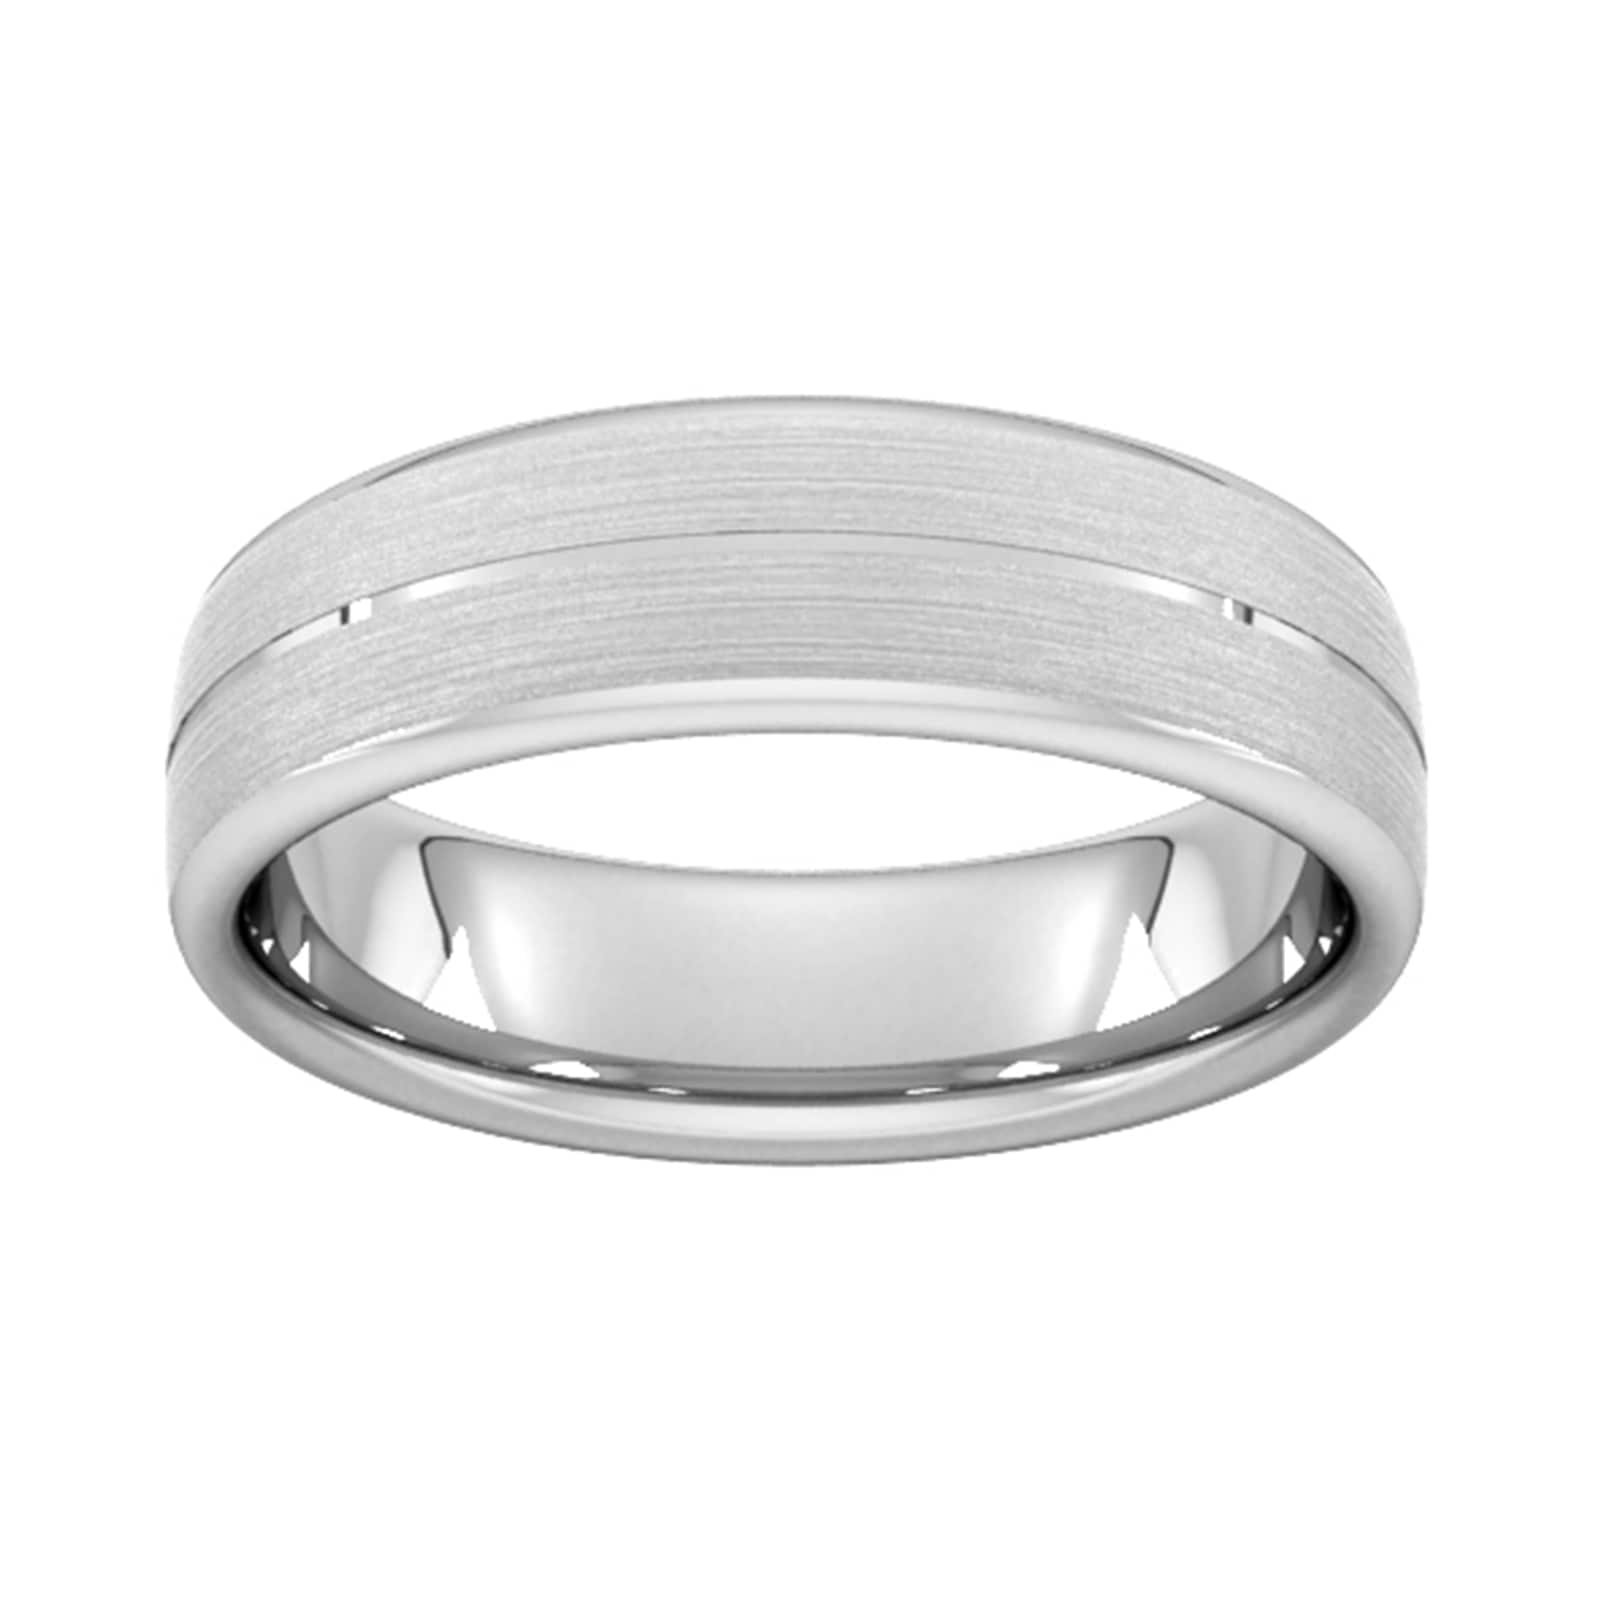 6mm Traditional Court Heavy Centre Groove With Chamfered Edge Wedding Ring In 9 Carat White Gold - Ring Size O